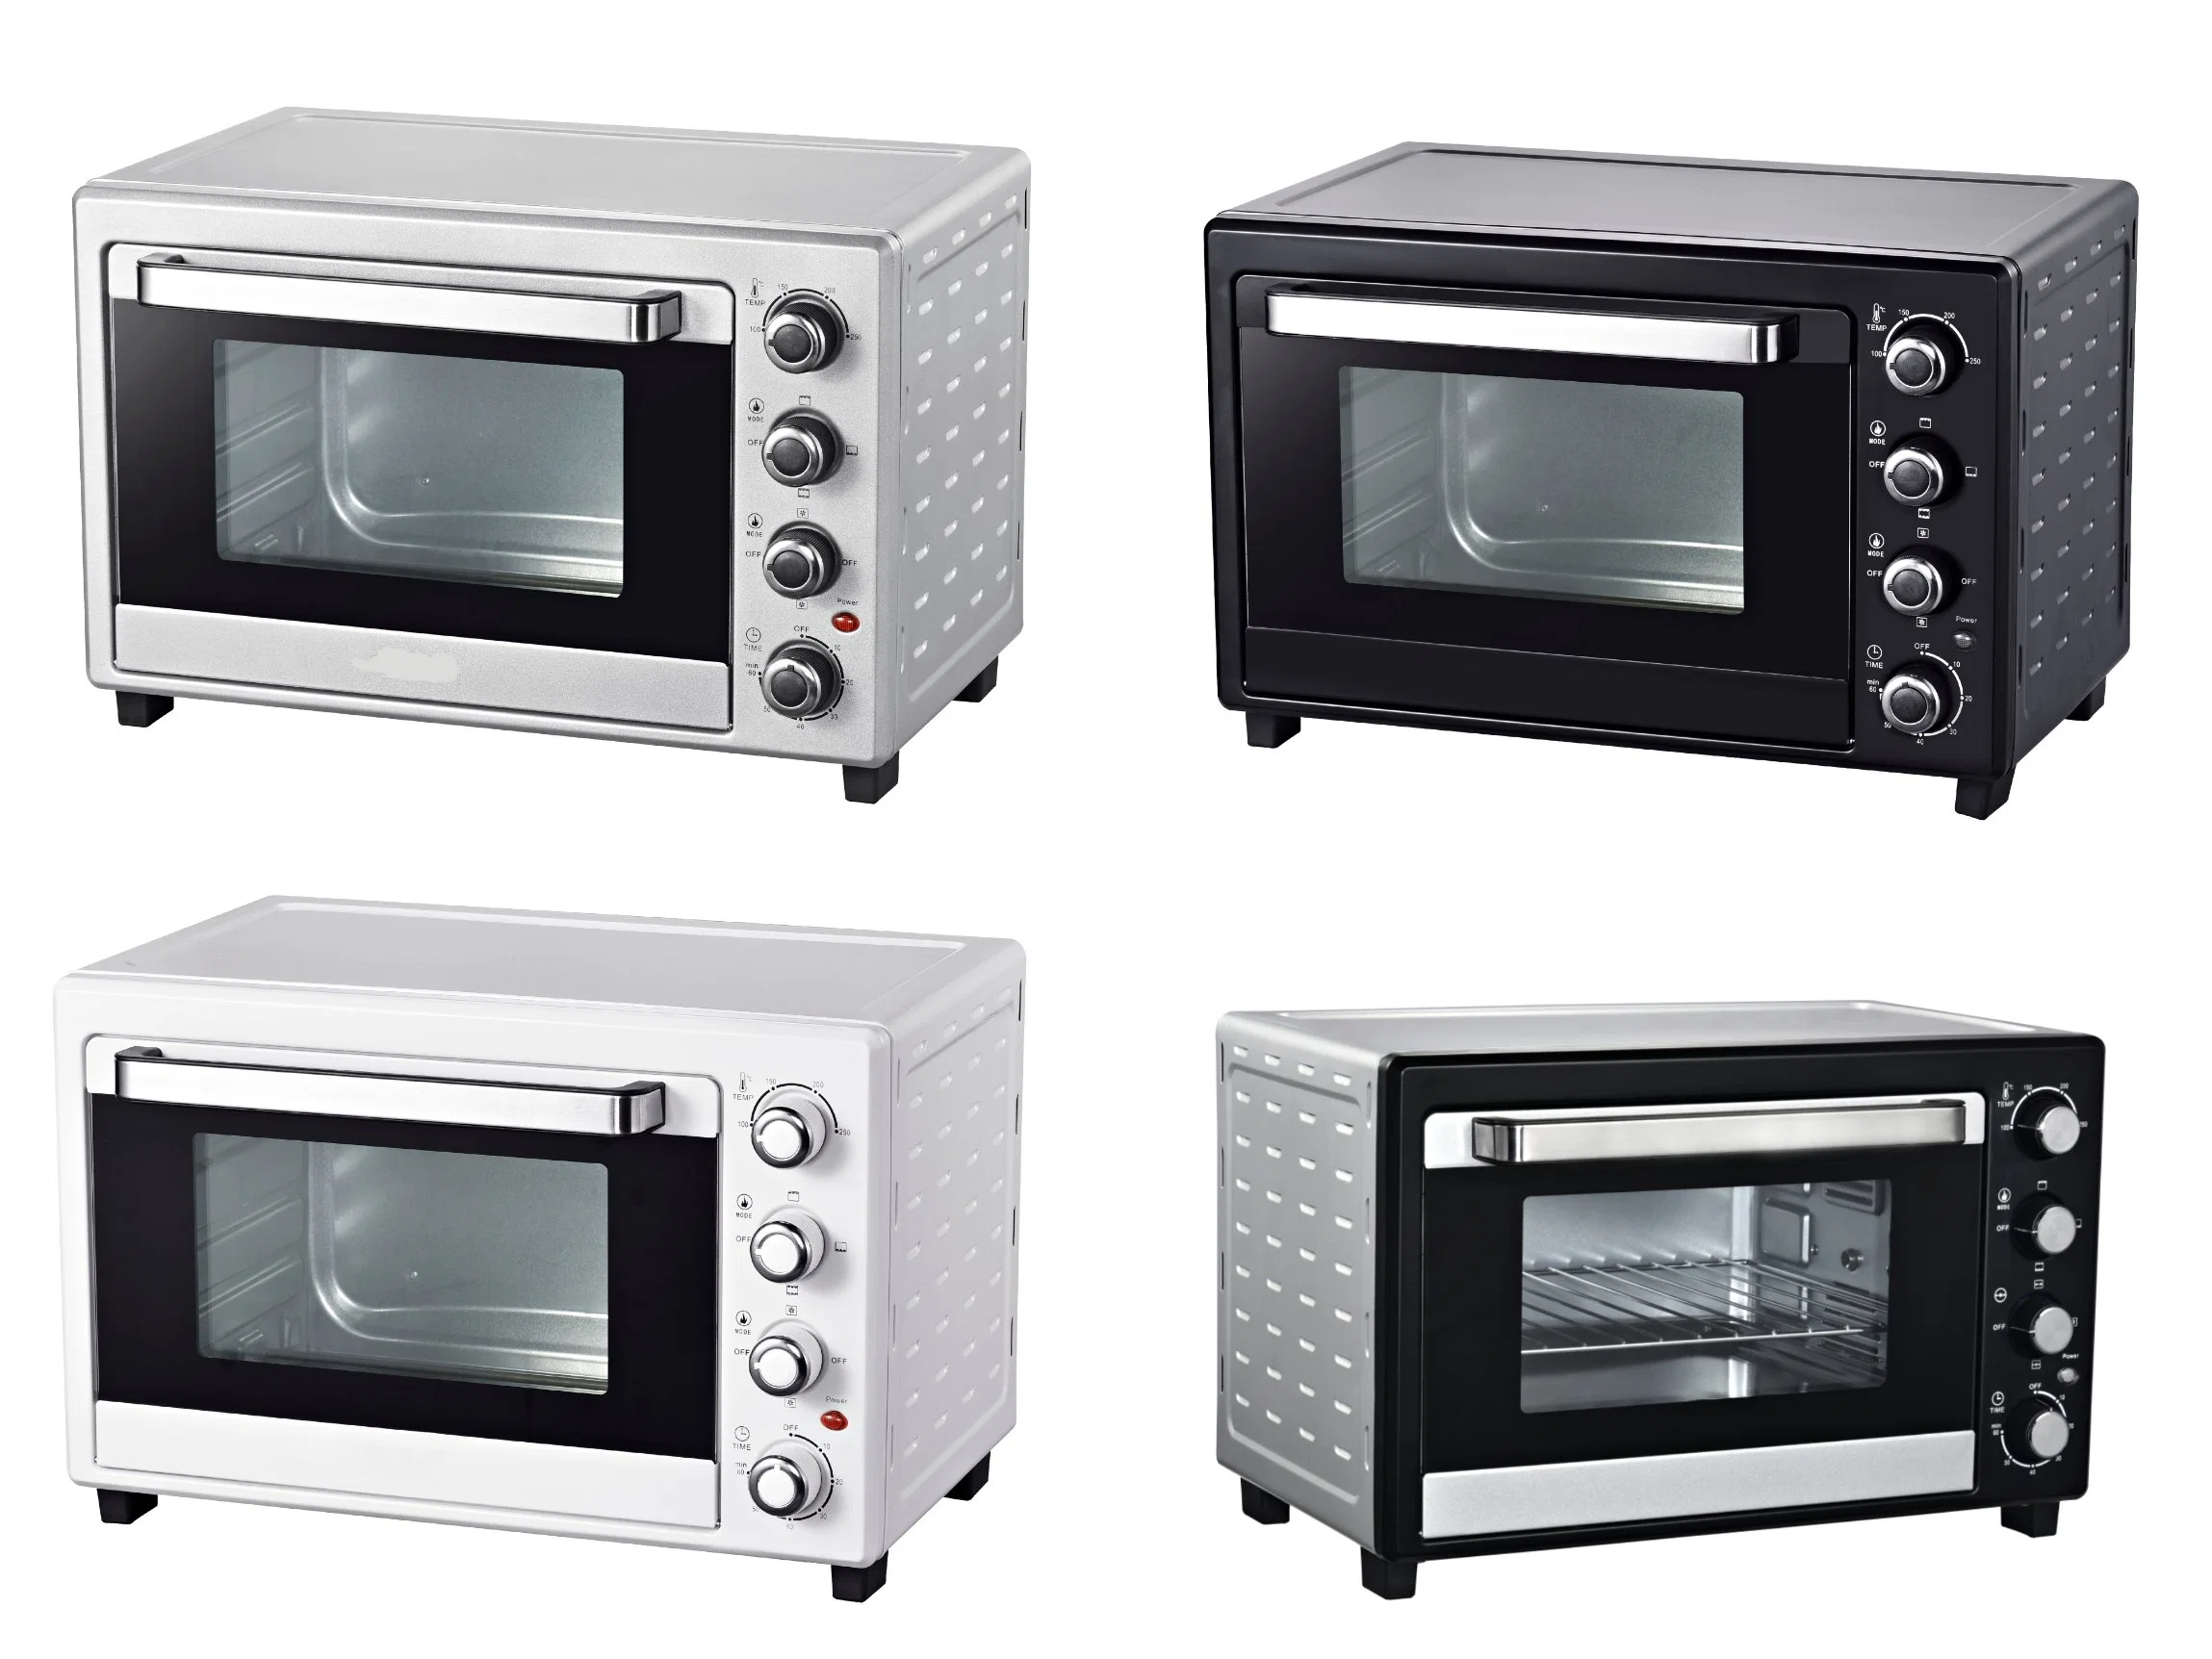 1800W Home Appliance Desktop Baking Pizza Electric Toaster Rotisserie Convection Ovens